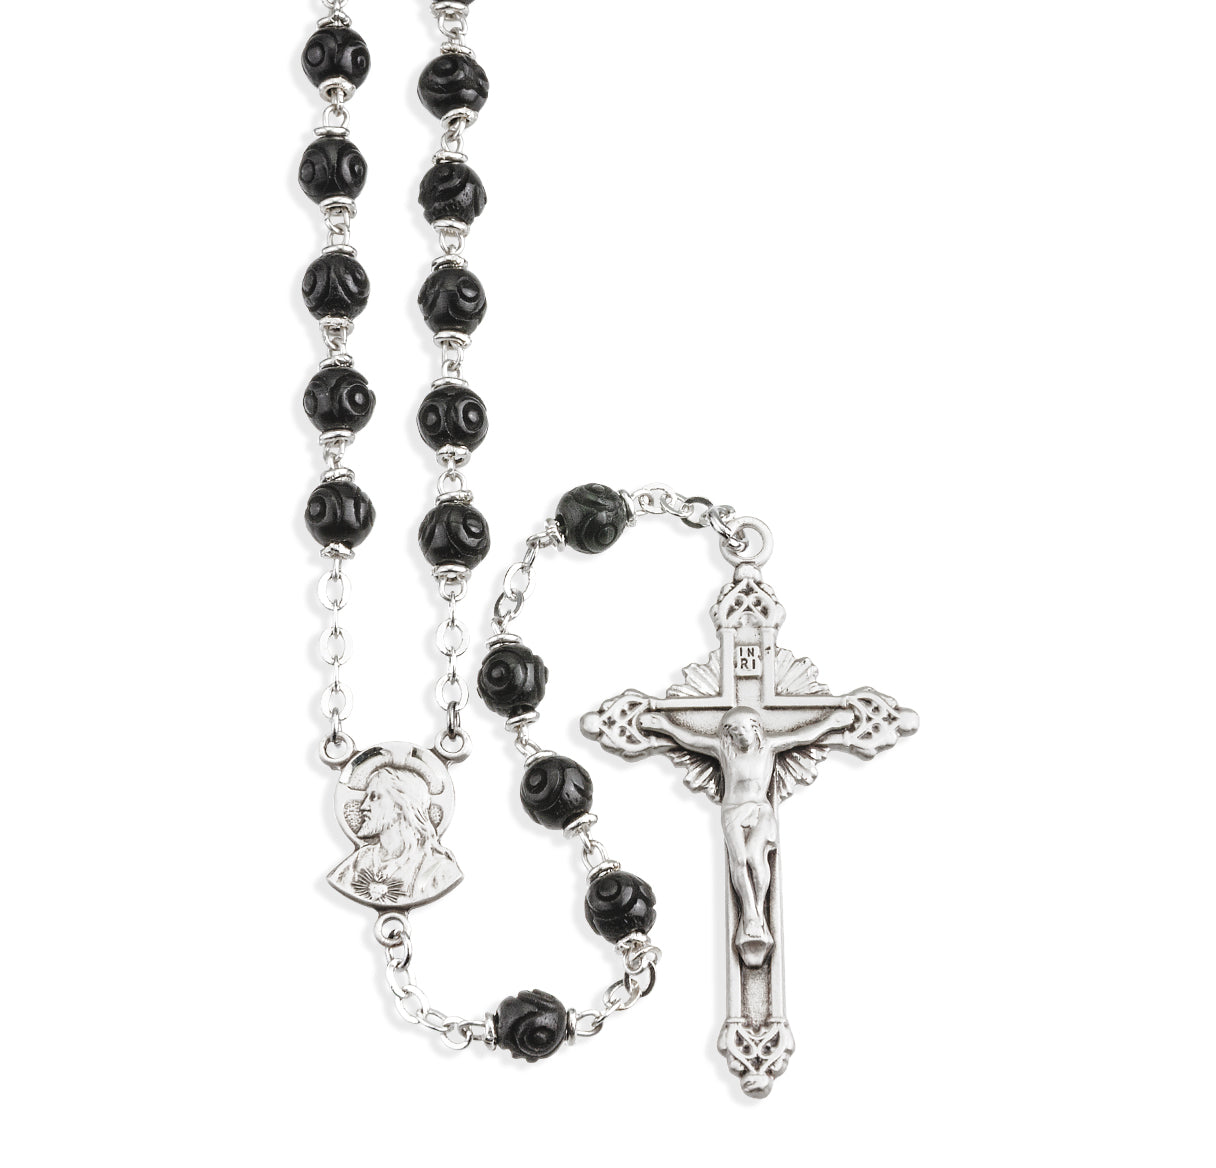 Black Carved Genuine Cocoa Bead Rosary Sterling Crucifix and Centerpiece